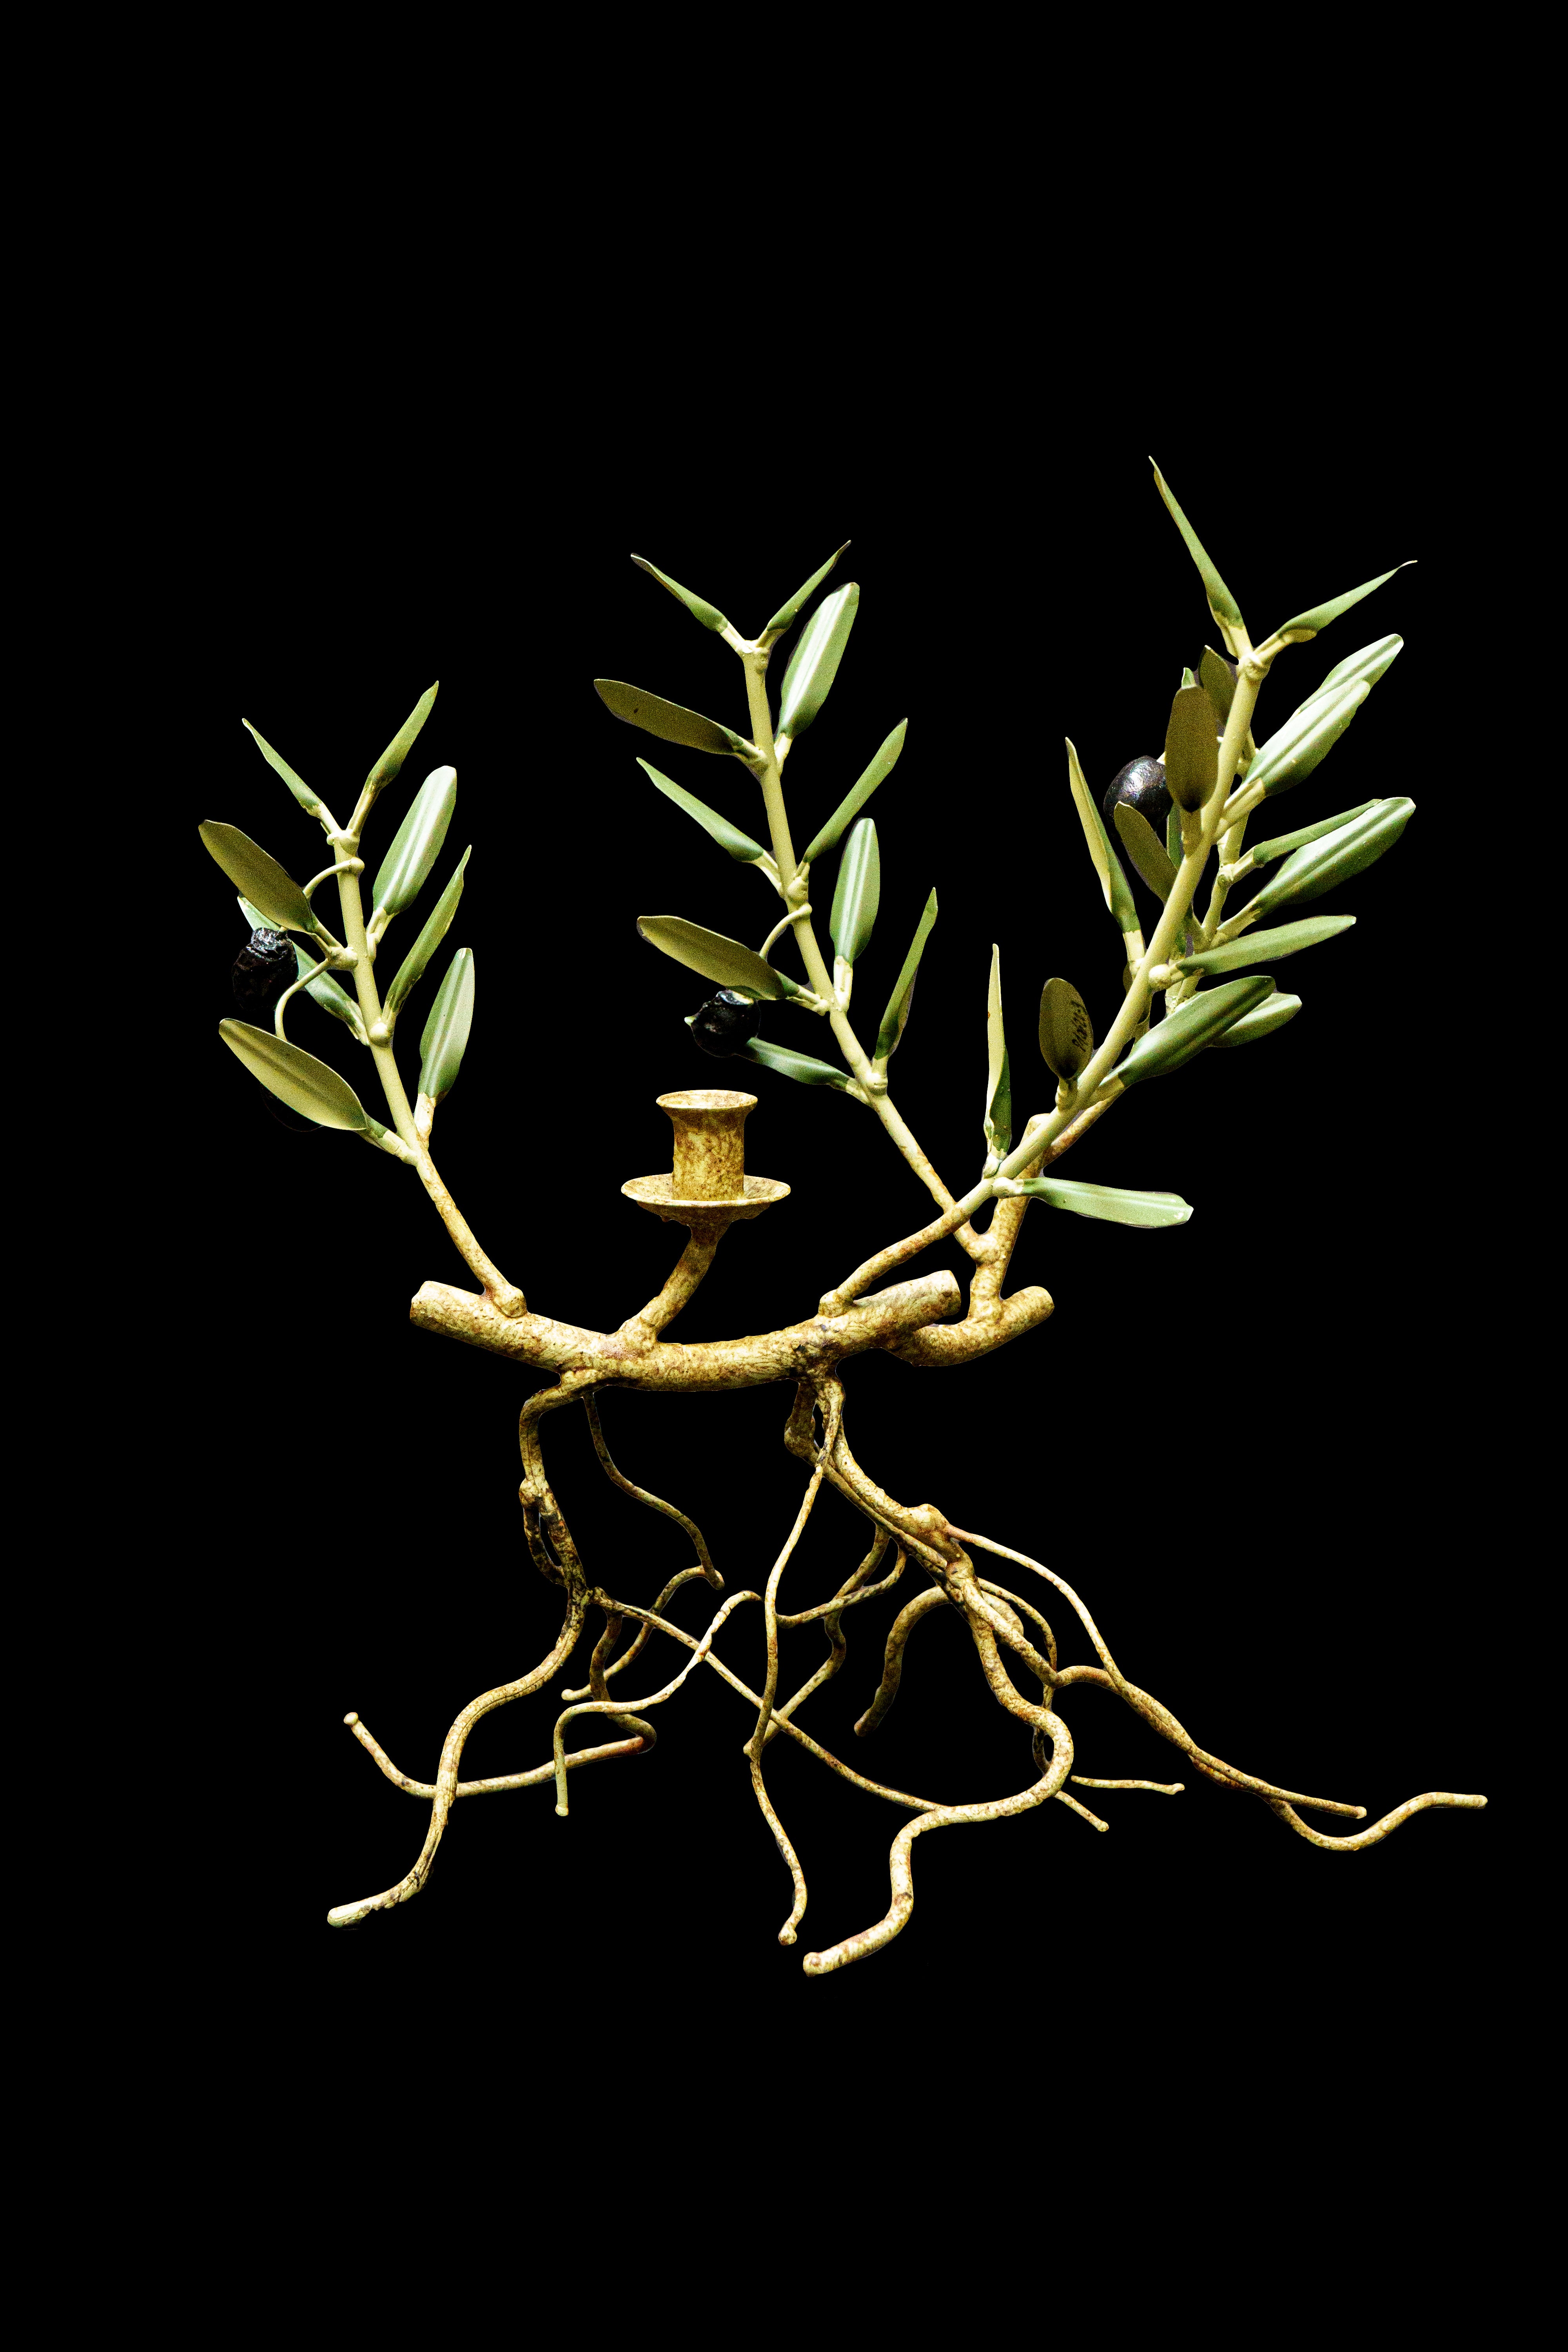 Crafted with meticulous attention to detail, this Olive Branch with Roots Candle Holder is a testament to the exquisite artisanship of Provence, France. Measuring 8 inches in length and depth, with a height of 6 inches, its dimensions create a